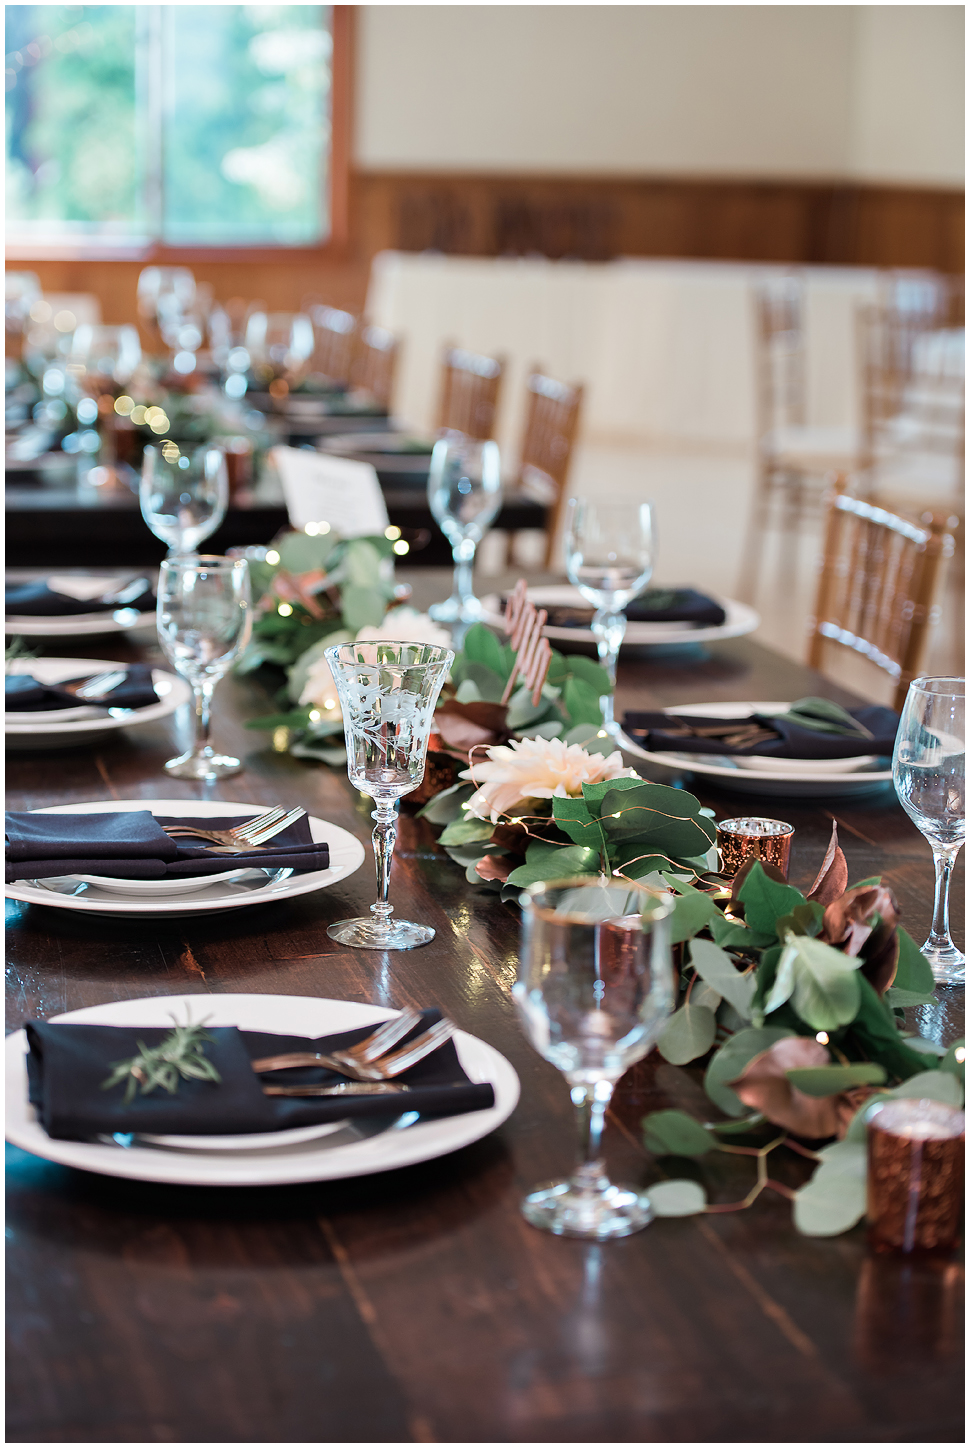 Farm table detail photo at wedding reception showing crystal water glass. eucalyptus garland